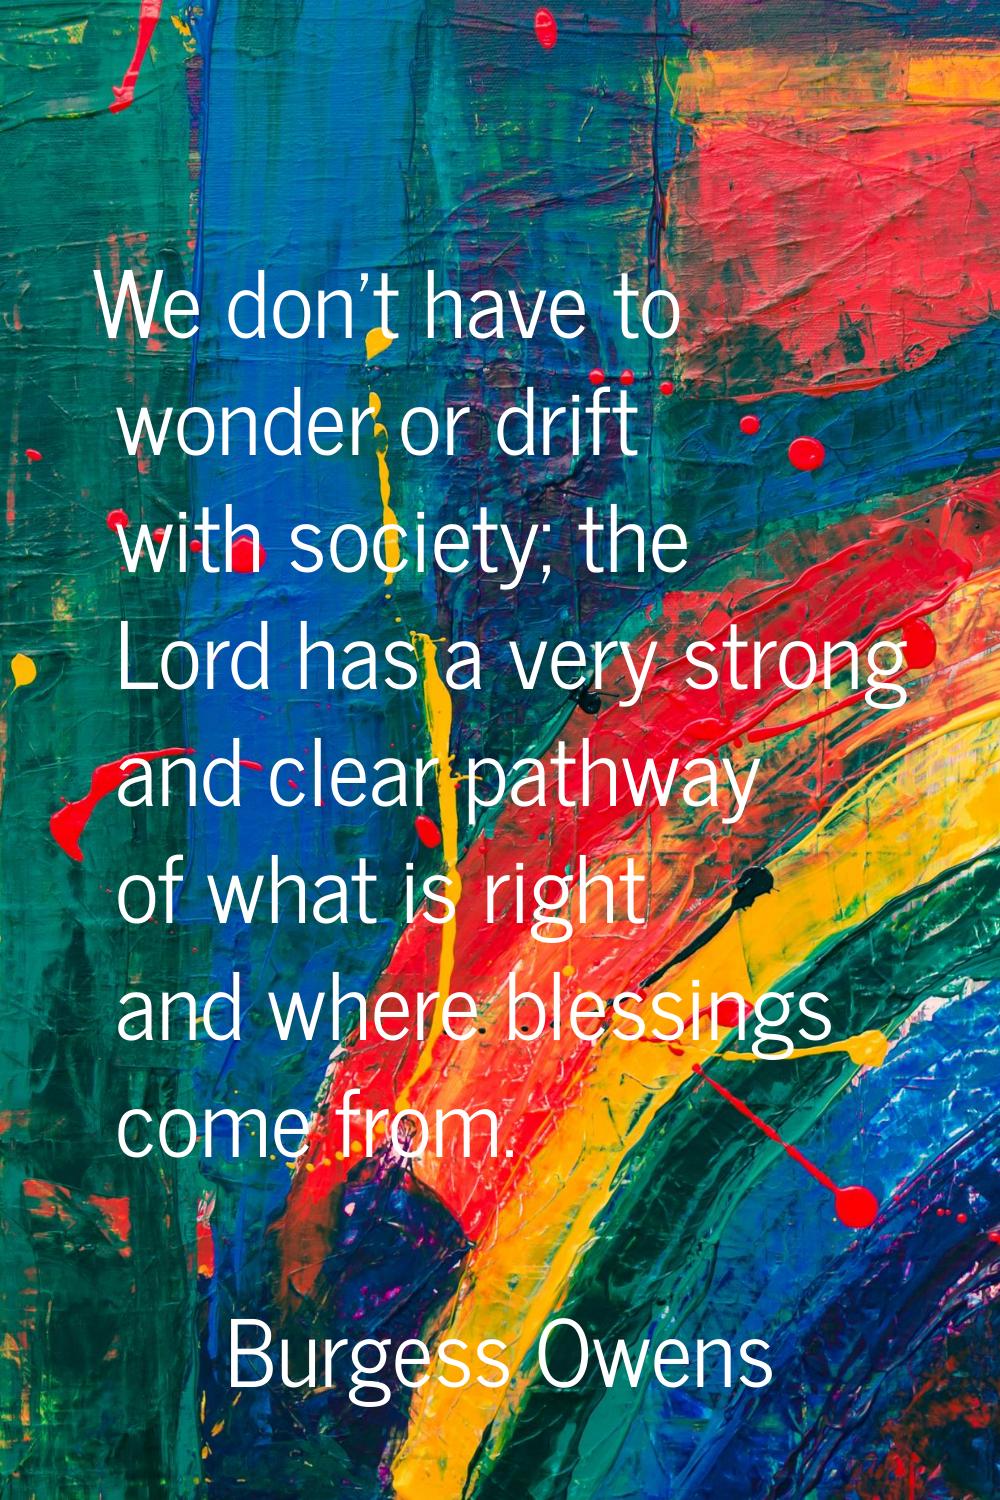 We don't have to wonder or drift with society; the Lord has a very strong and clear pathway of what